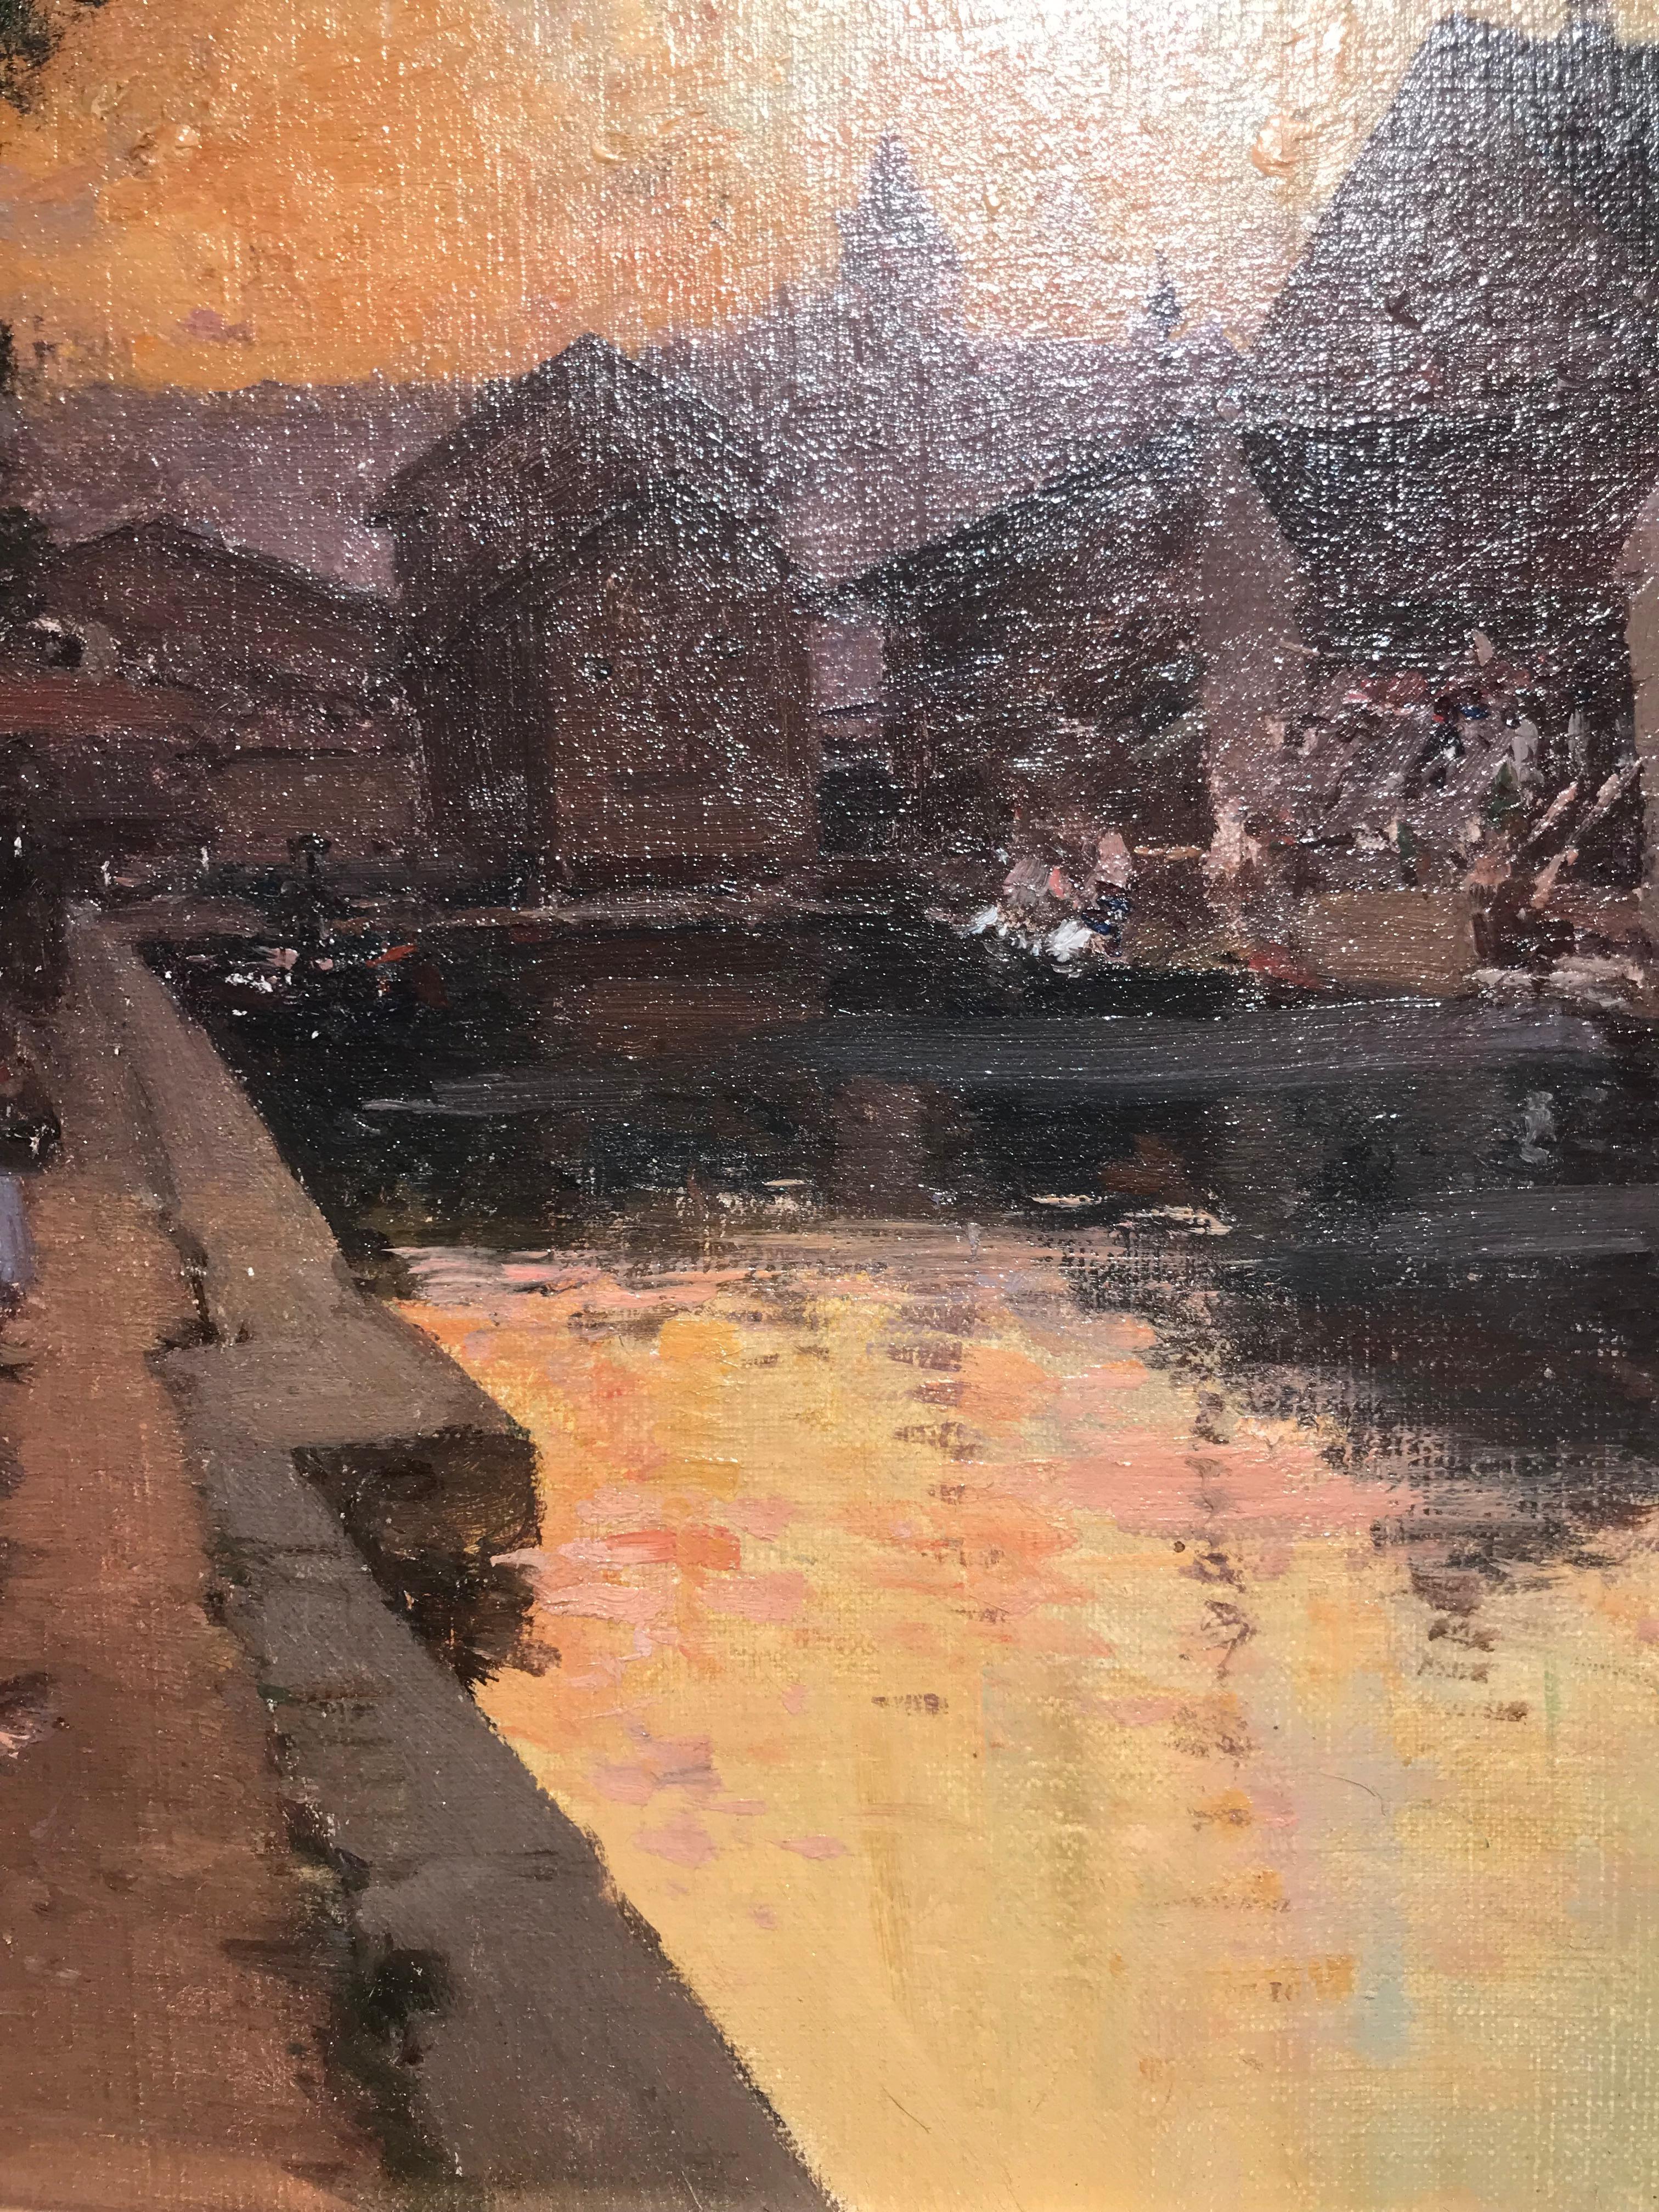 'Evening Glow' by Eugene Galien-Laloue is a Post-impressionist Parisian Street Scene - a painting filled with beautiful warm light.
Provenance: Private collection, Paris
Literature: To be included in the forthcoming Catalogue Raisonne Vol. II by Nöe